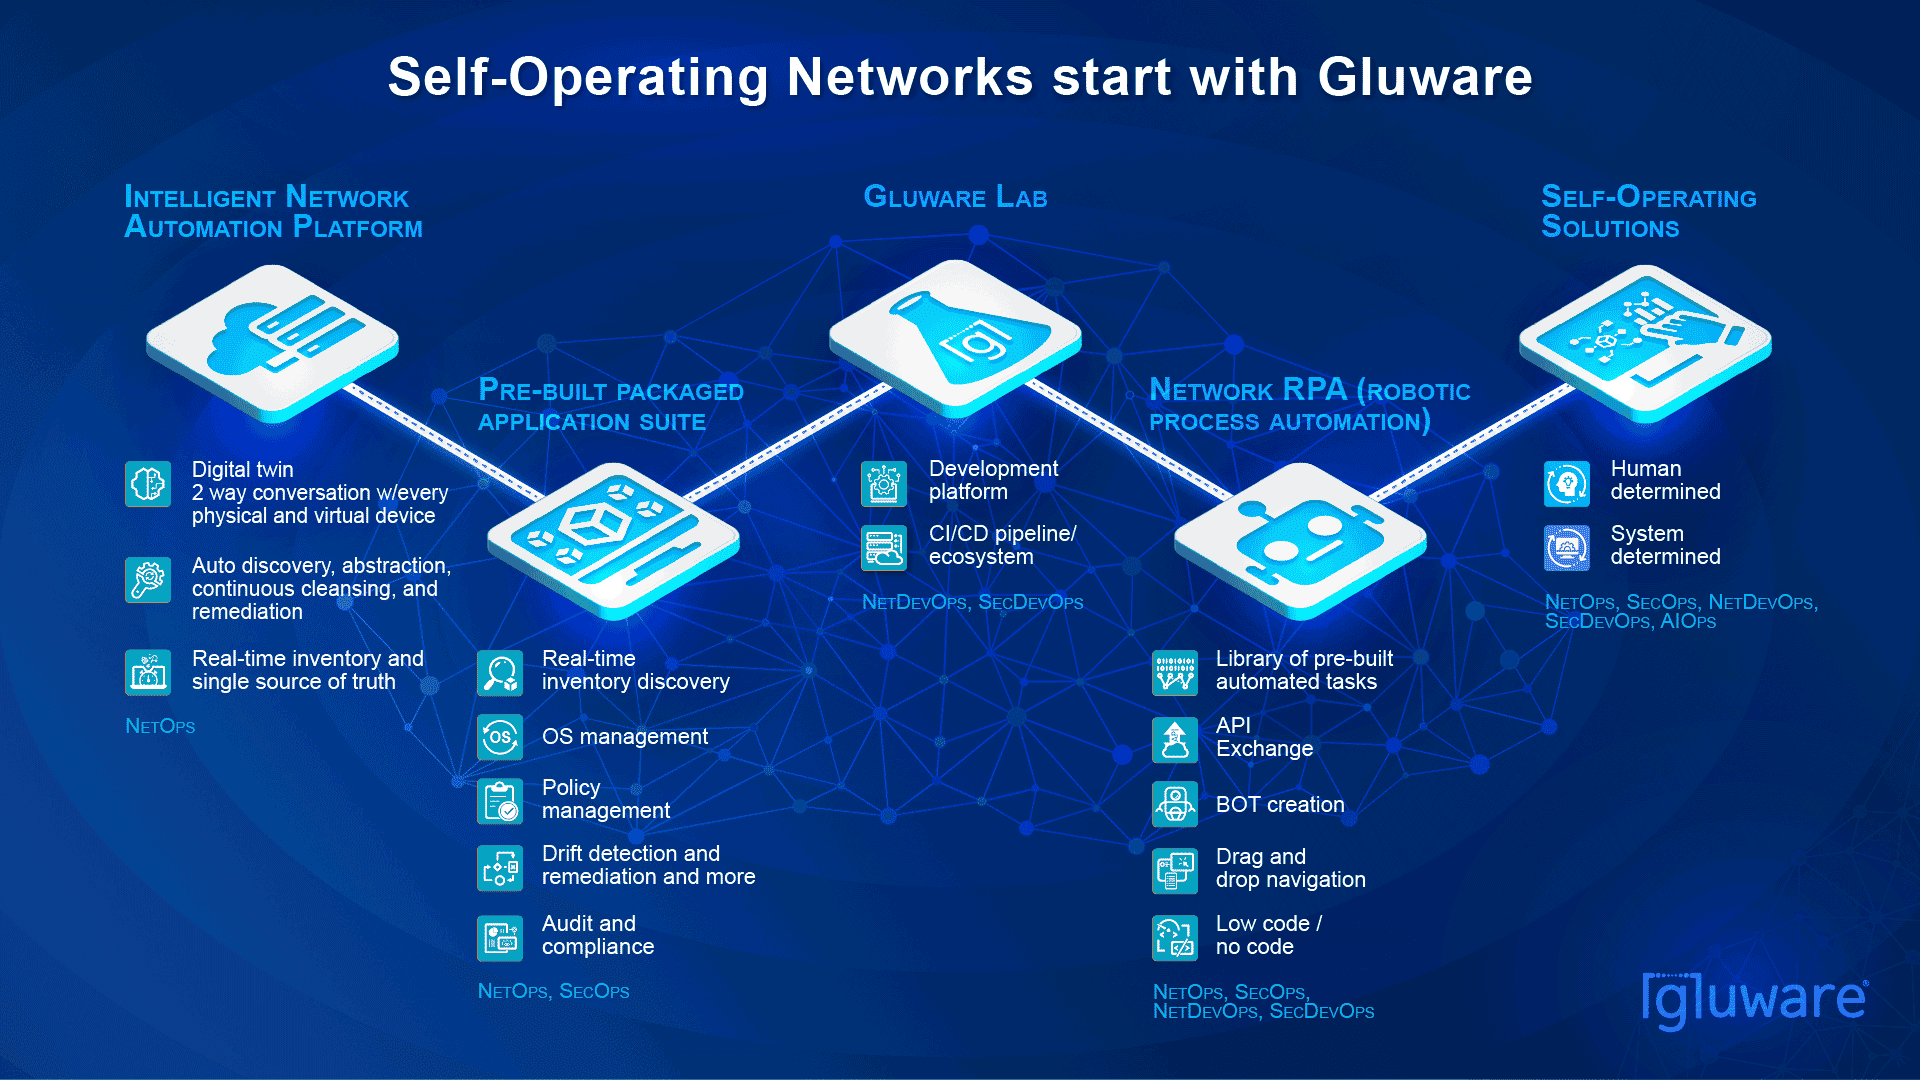 The path to self-operating enterprise networks. Self-operating networks start with Gluware.